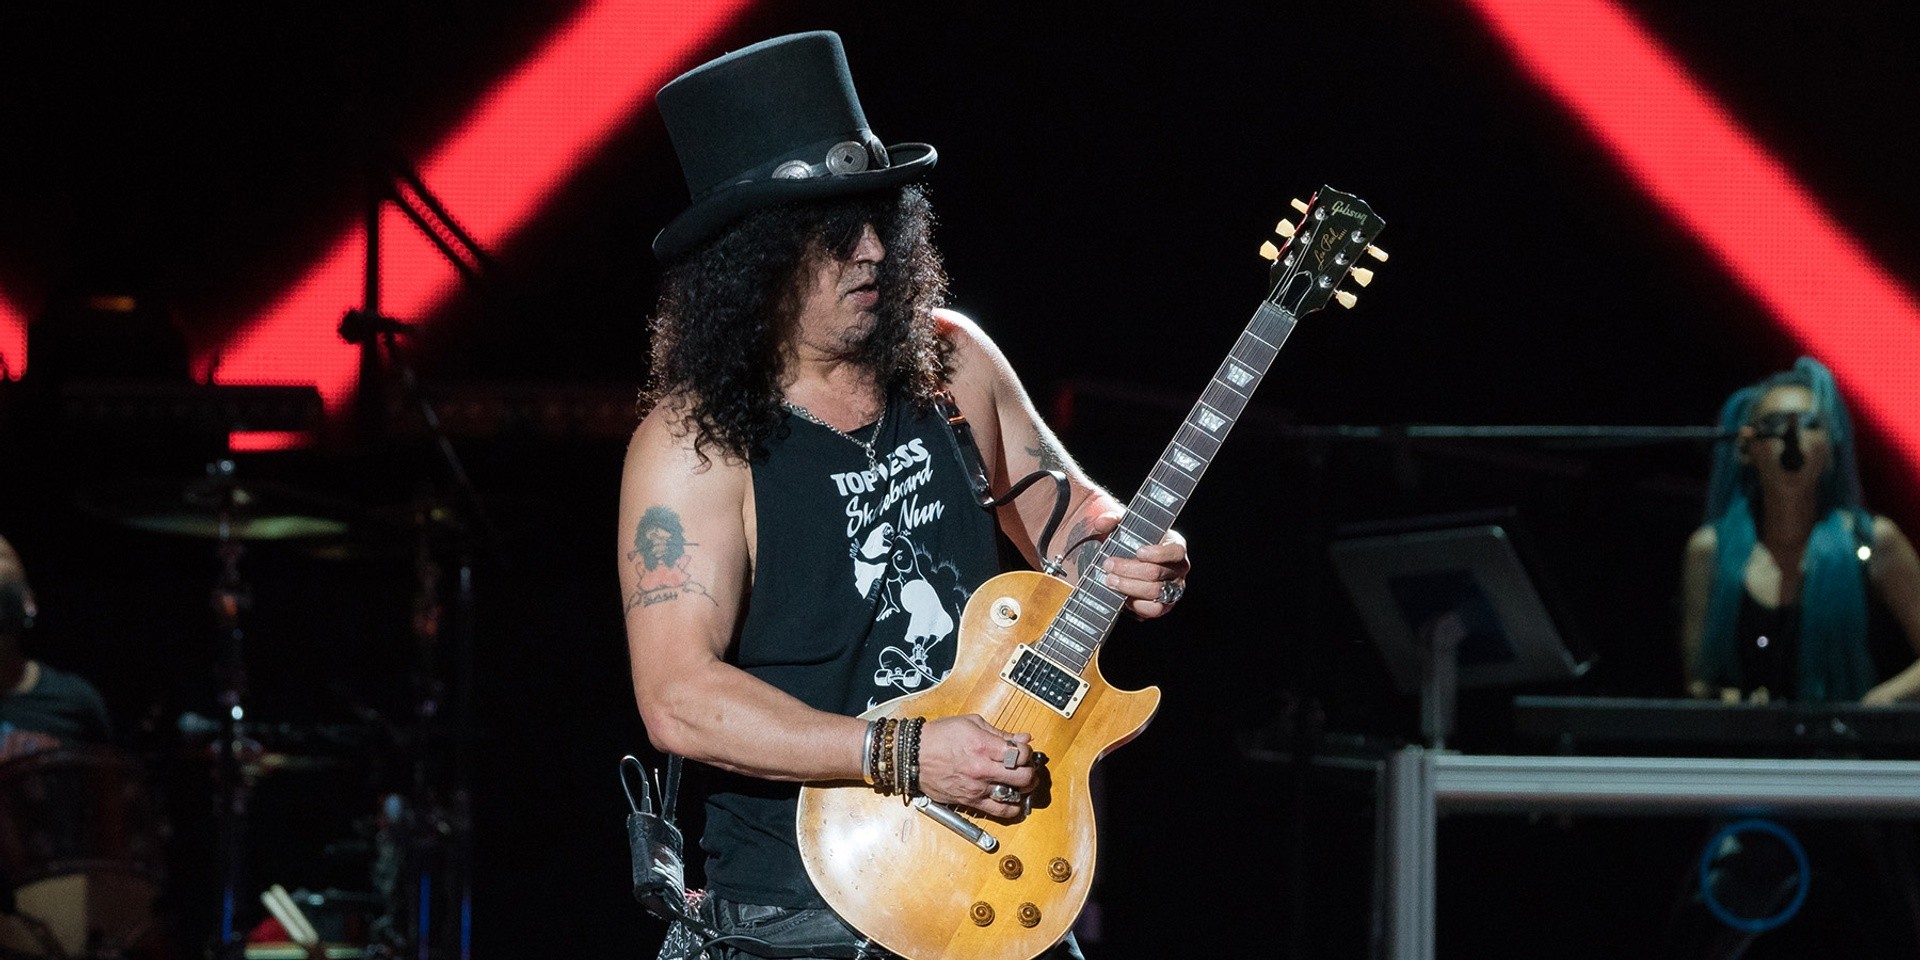 No one is sure when concertgoers will get RFID refunds from Guns N' Roses show